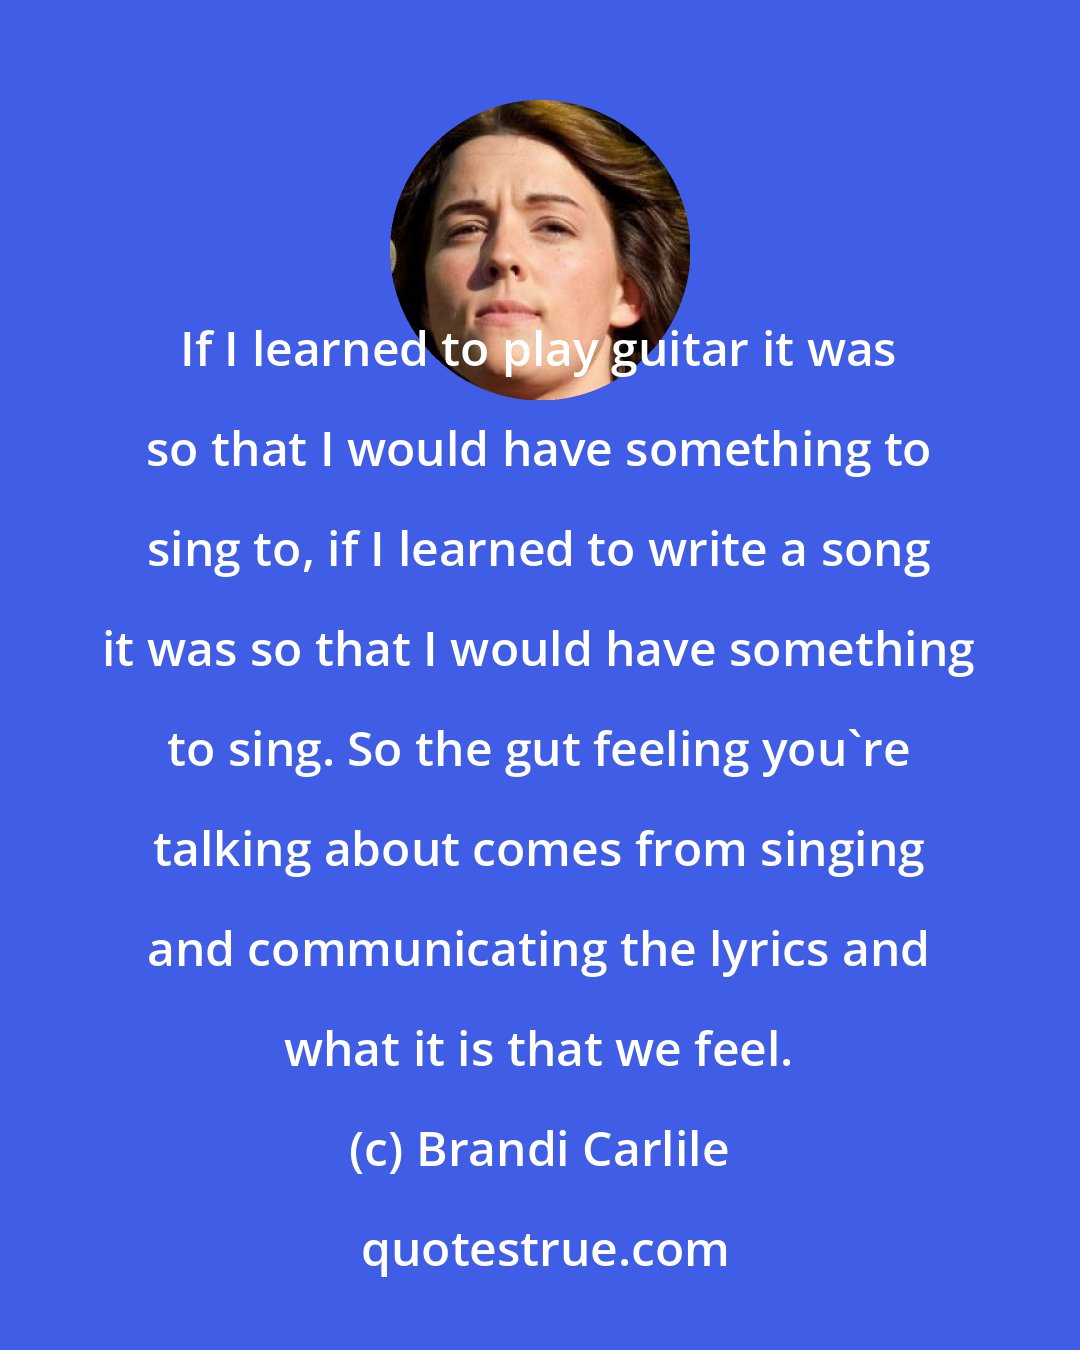 Brandi Carlile: If I learned to play guitar it was so that I would have something to sing to, if I learned to write a song it was so that I would have something to sing. So the gut feeling you're talking about comes from singing and communicating the lyrics and what it is that we feel.